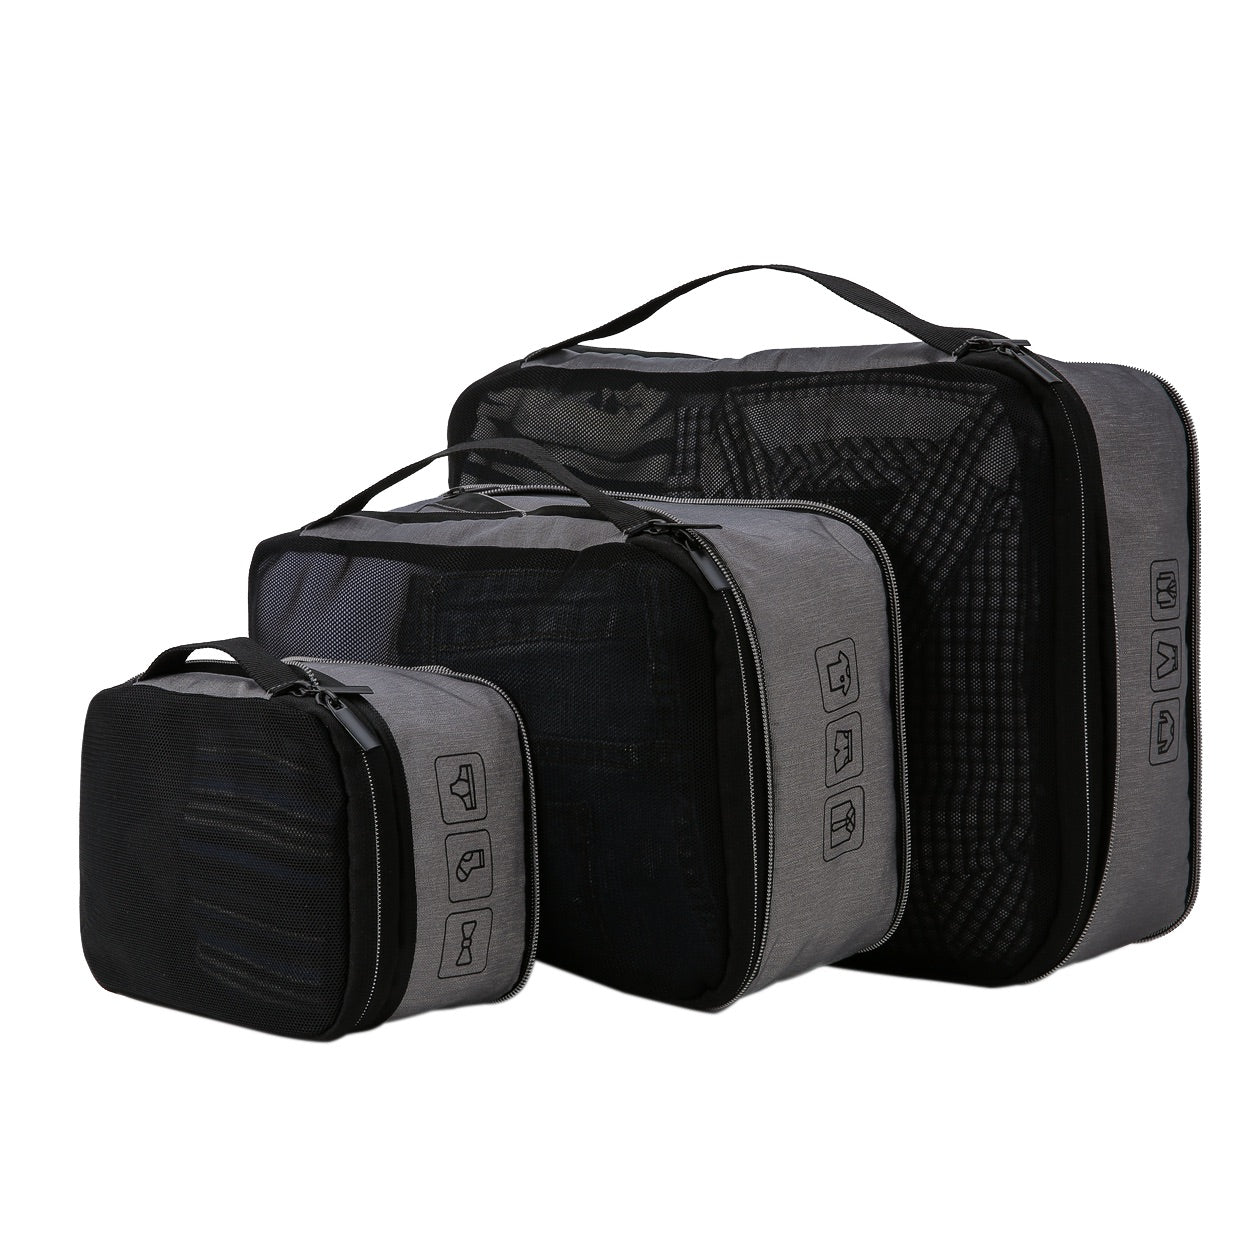 Compression packing cubes by GILBANO